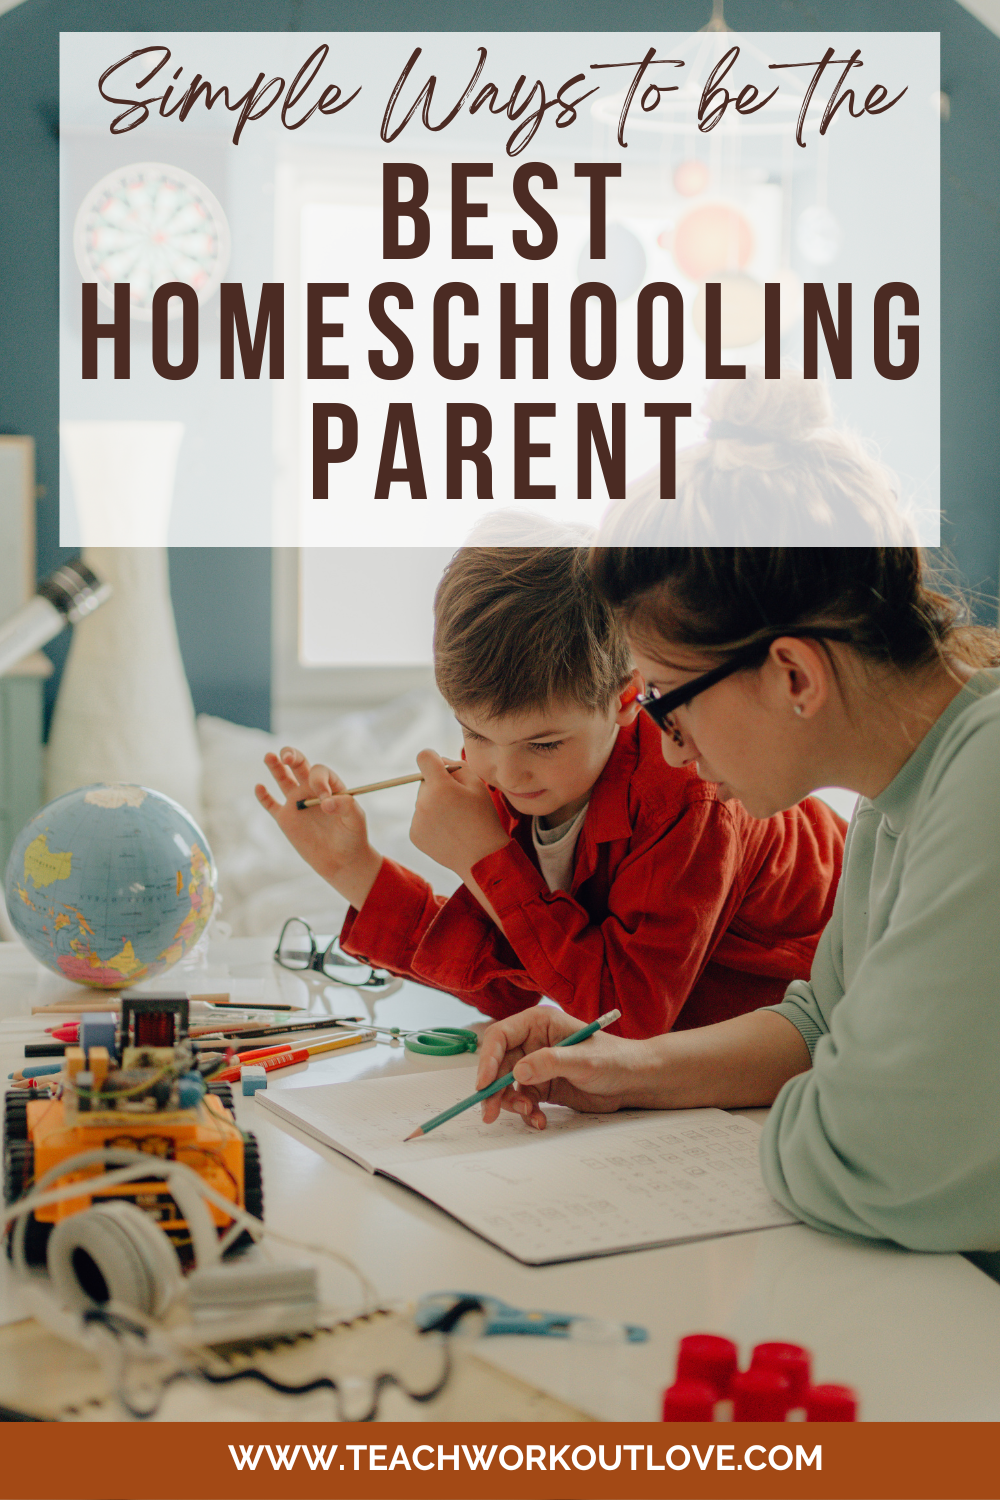 Parents who care enough to homeschool their children are usually very invested in making sure that they provide a well-rounded education. Here are some simple techniques you can use to help reach that goal.